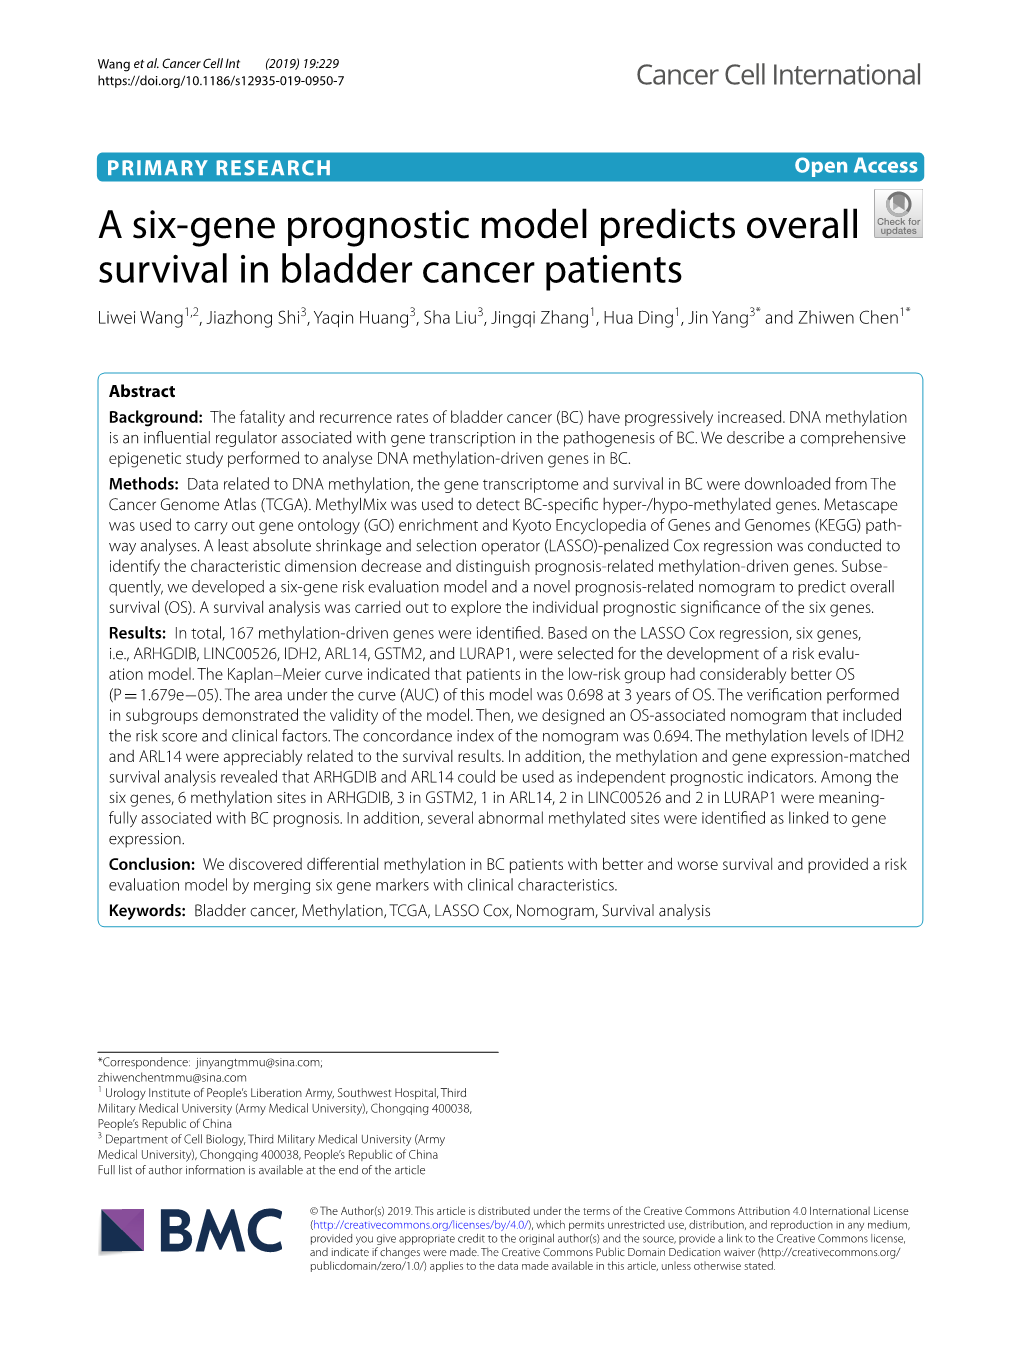 A Six-Gene Prognostic Model Predicts Overall Survival in Bladder Cancer